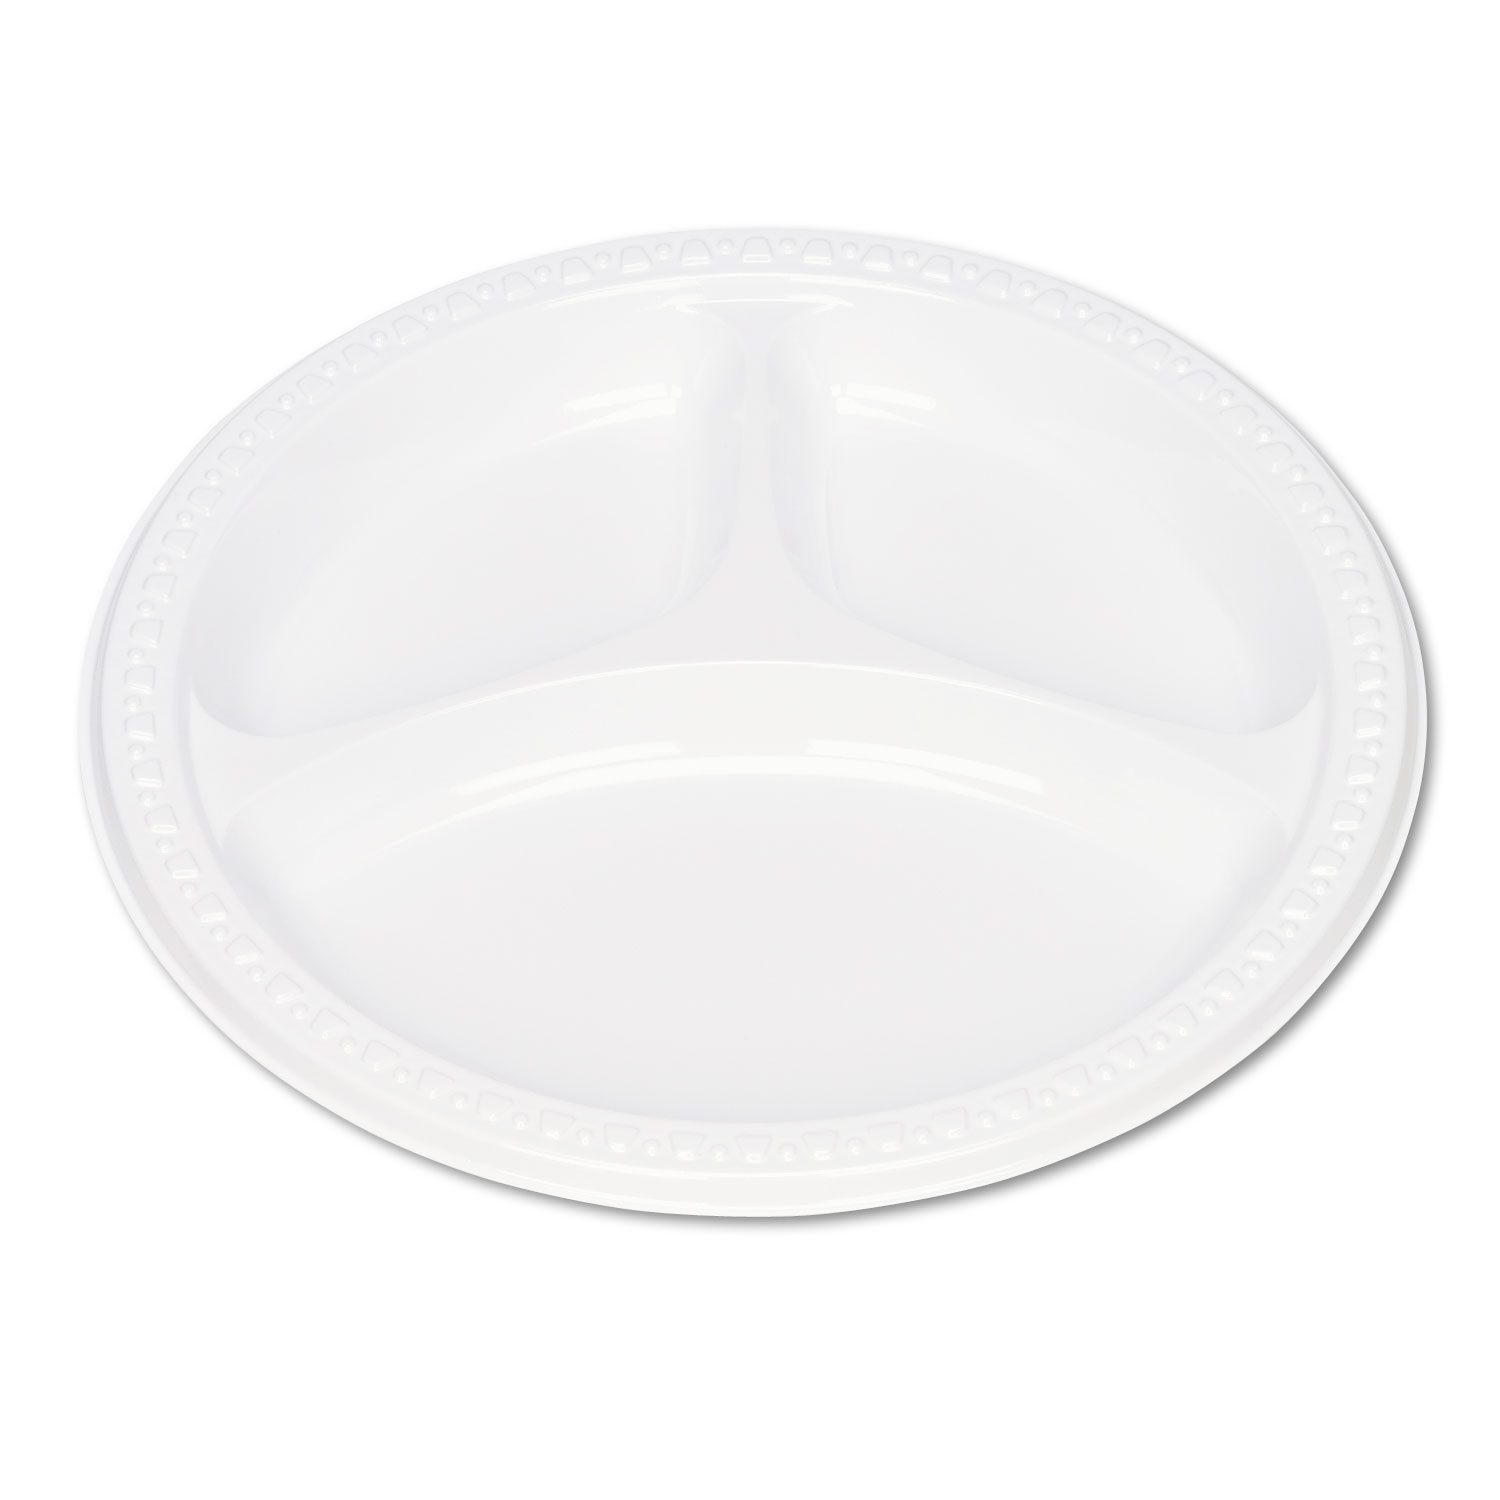  Tablemate 19644WH Plastic Dinnerware, Compartment Plates, 9 dia, White, 125/Pack (TBL19644WH) 